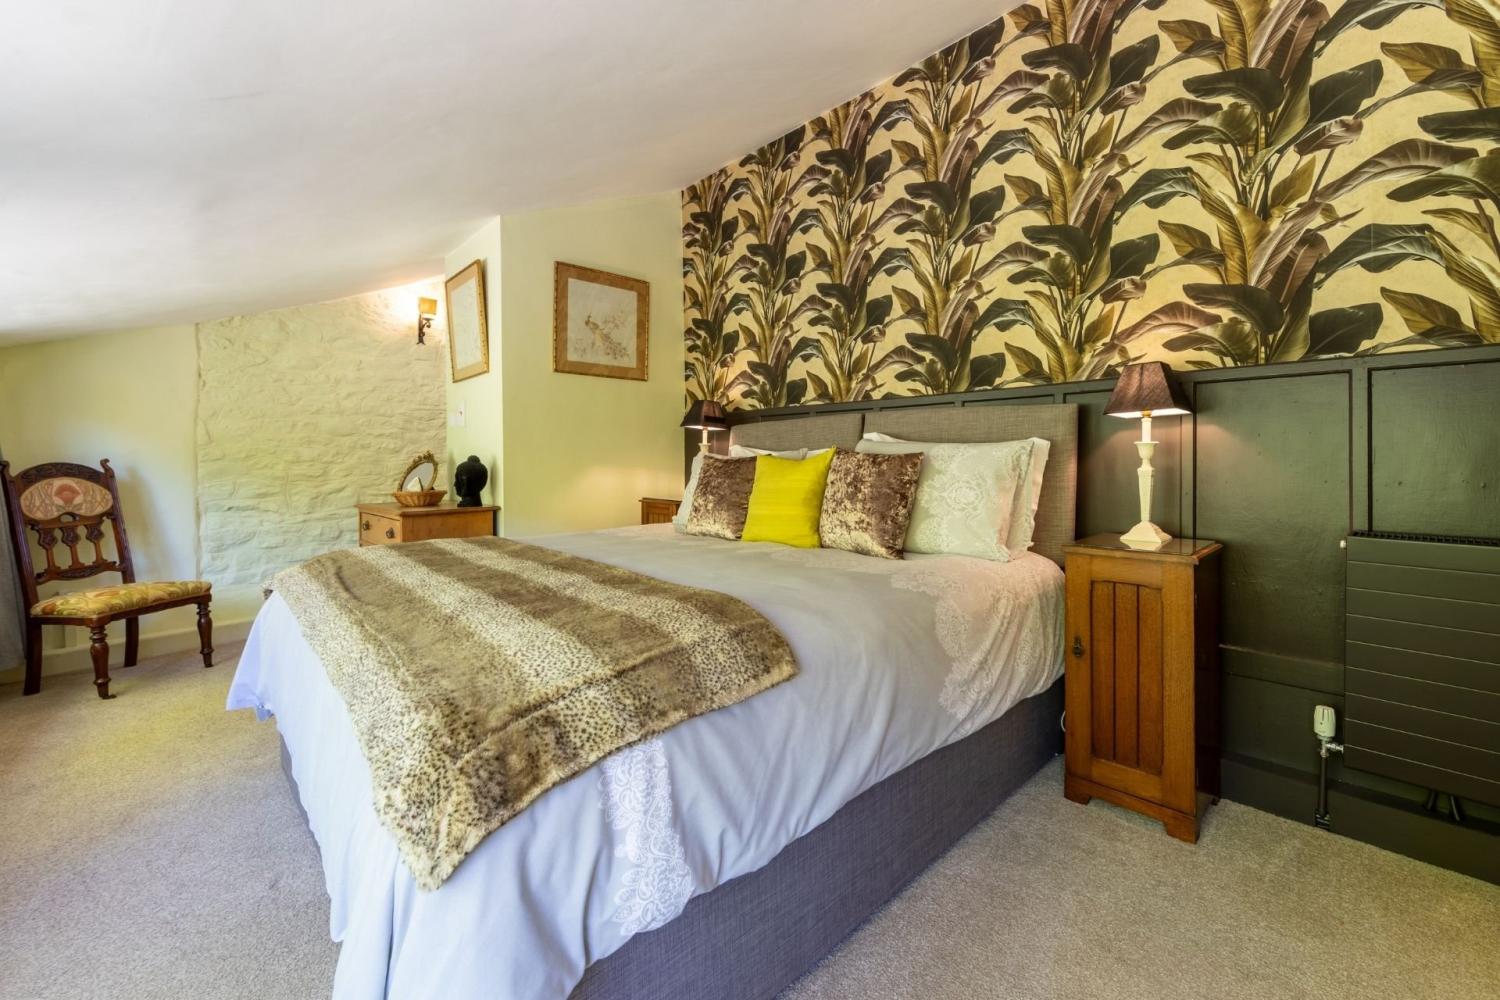 The Garden Room is a large en-suite on the ground floor. It can be configured as a Super king or Twin bedroom - you choose.